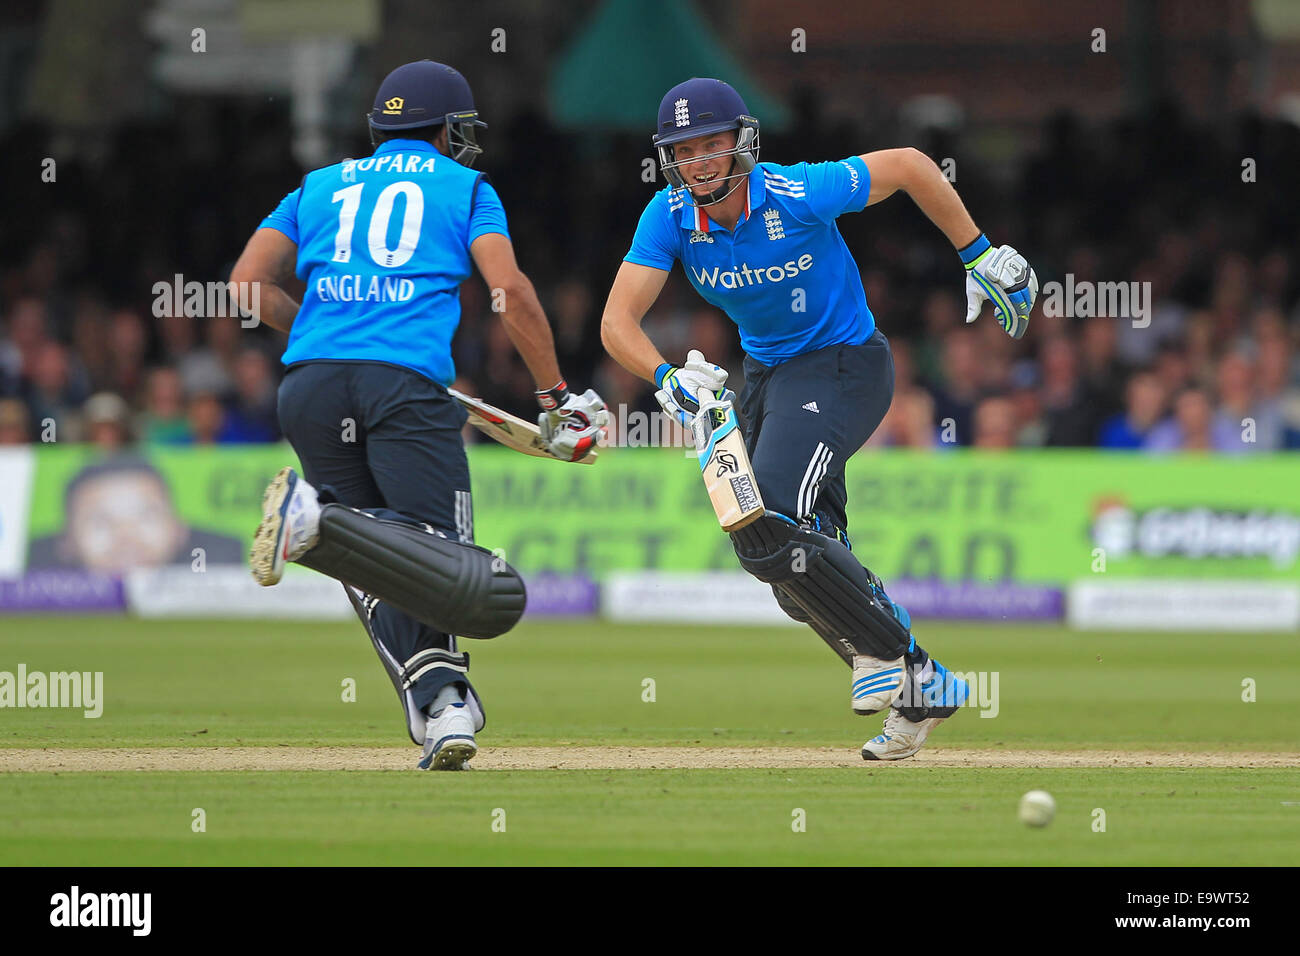 Cricket - Jos Buttler and Ravi Bopara of England run between the wickets during the ODI against Sri Lanka at Lord's in 2014 Stock Photo